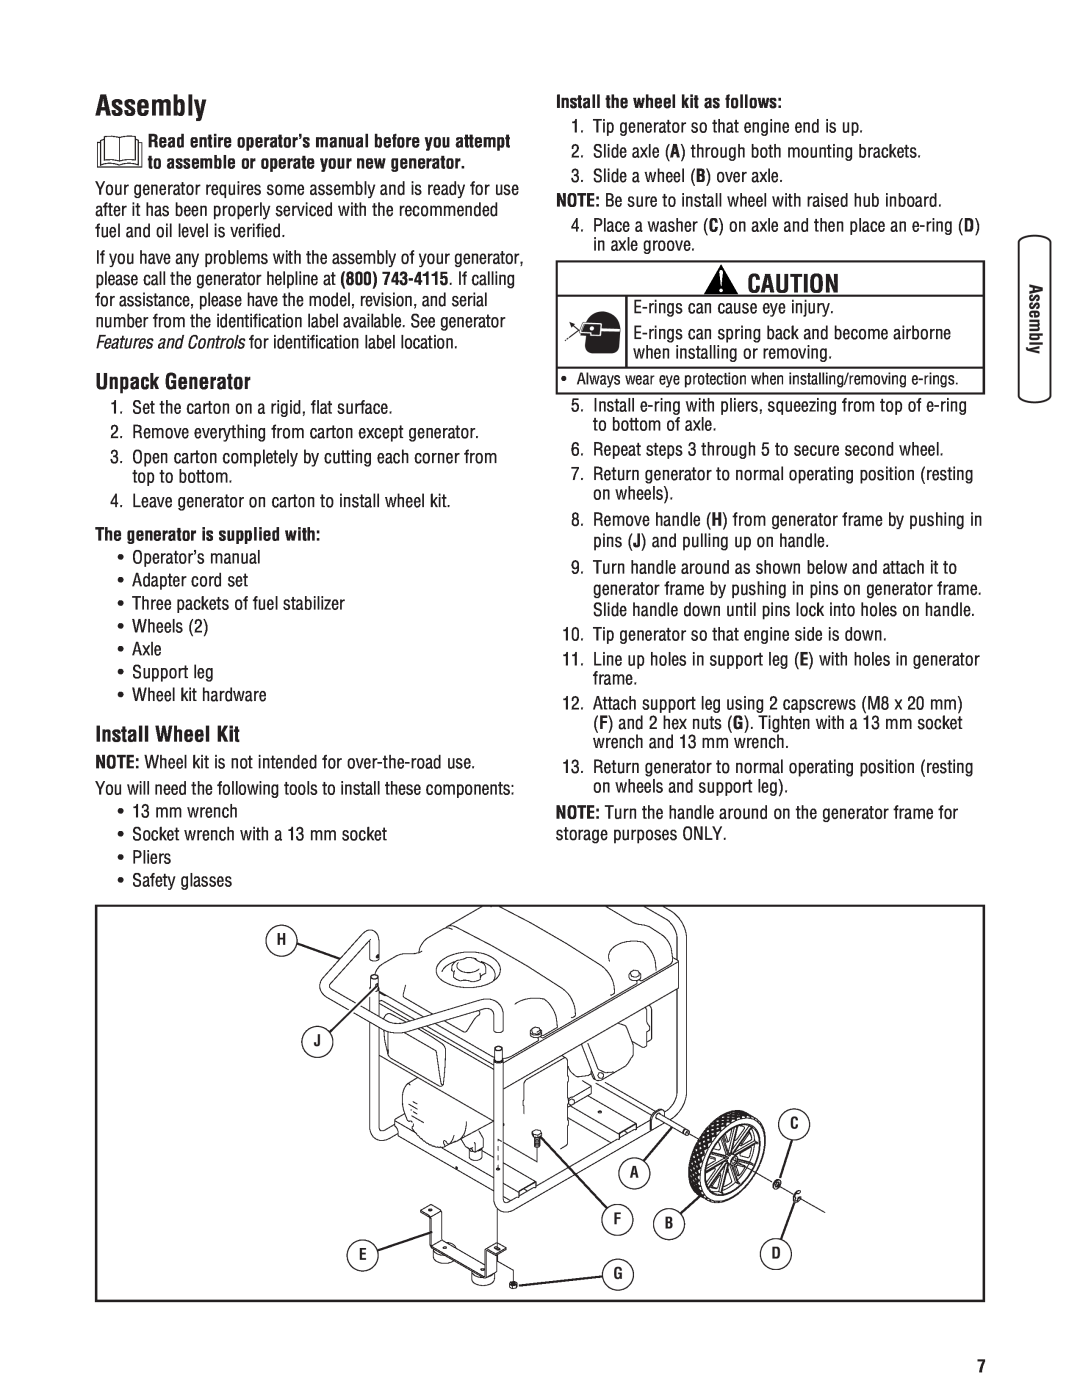 Briggs & Stratton Portable Generator manual Assembly, Unpack Generator, Install Wheel Kit, The generator is supplied with 